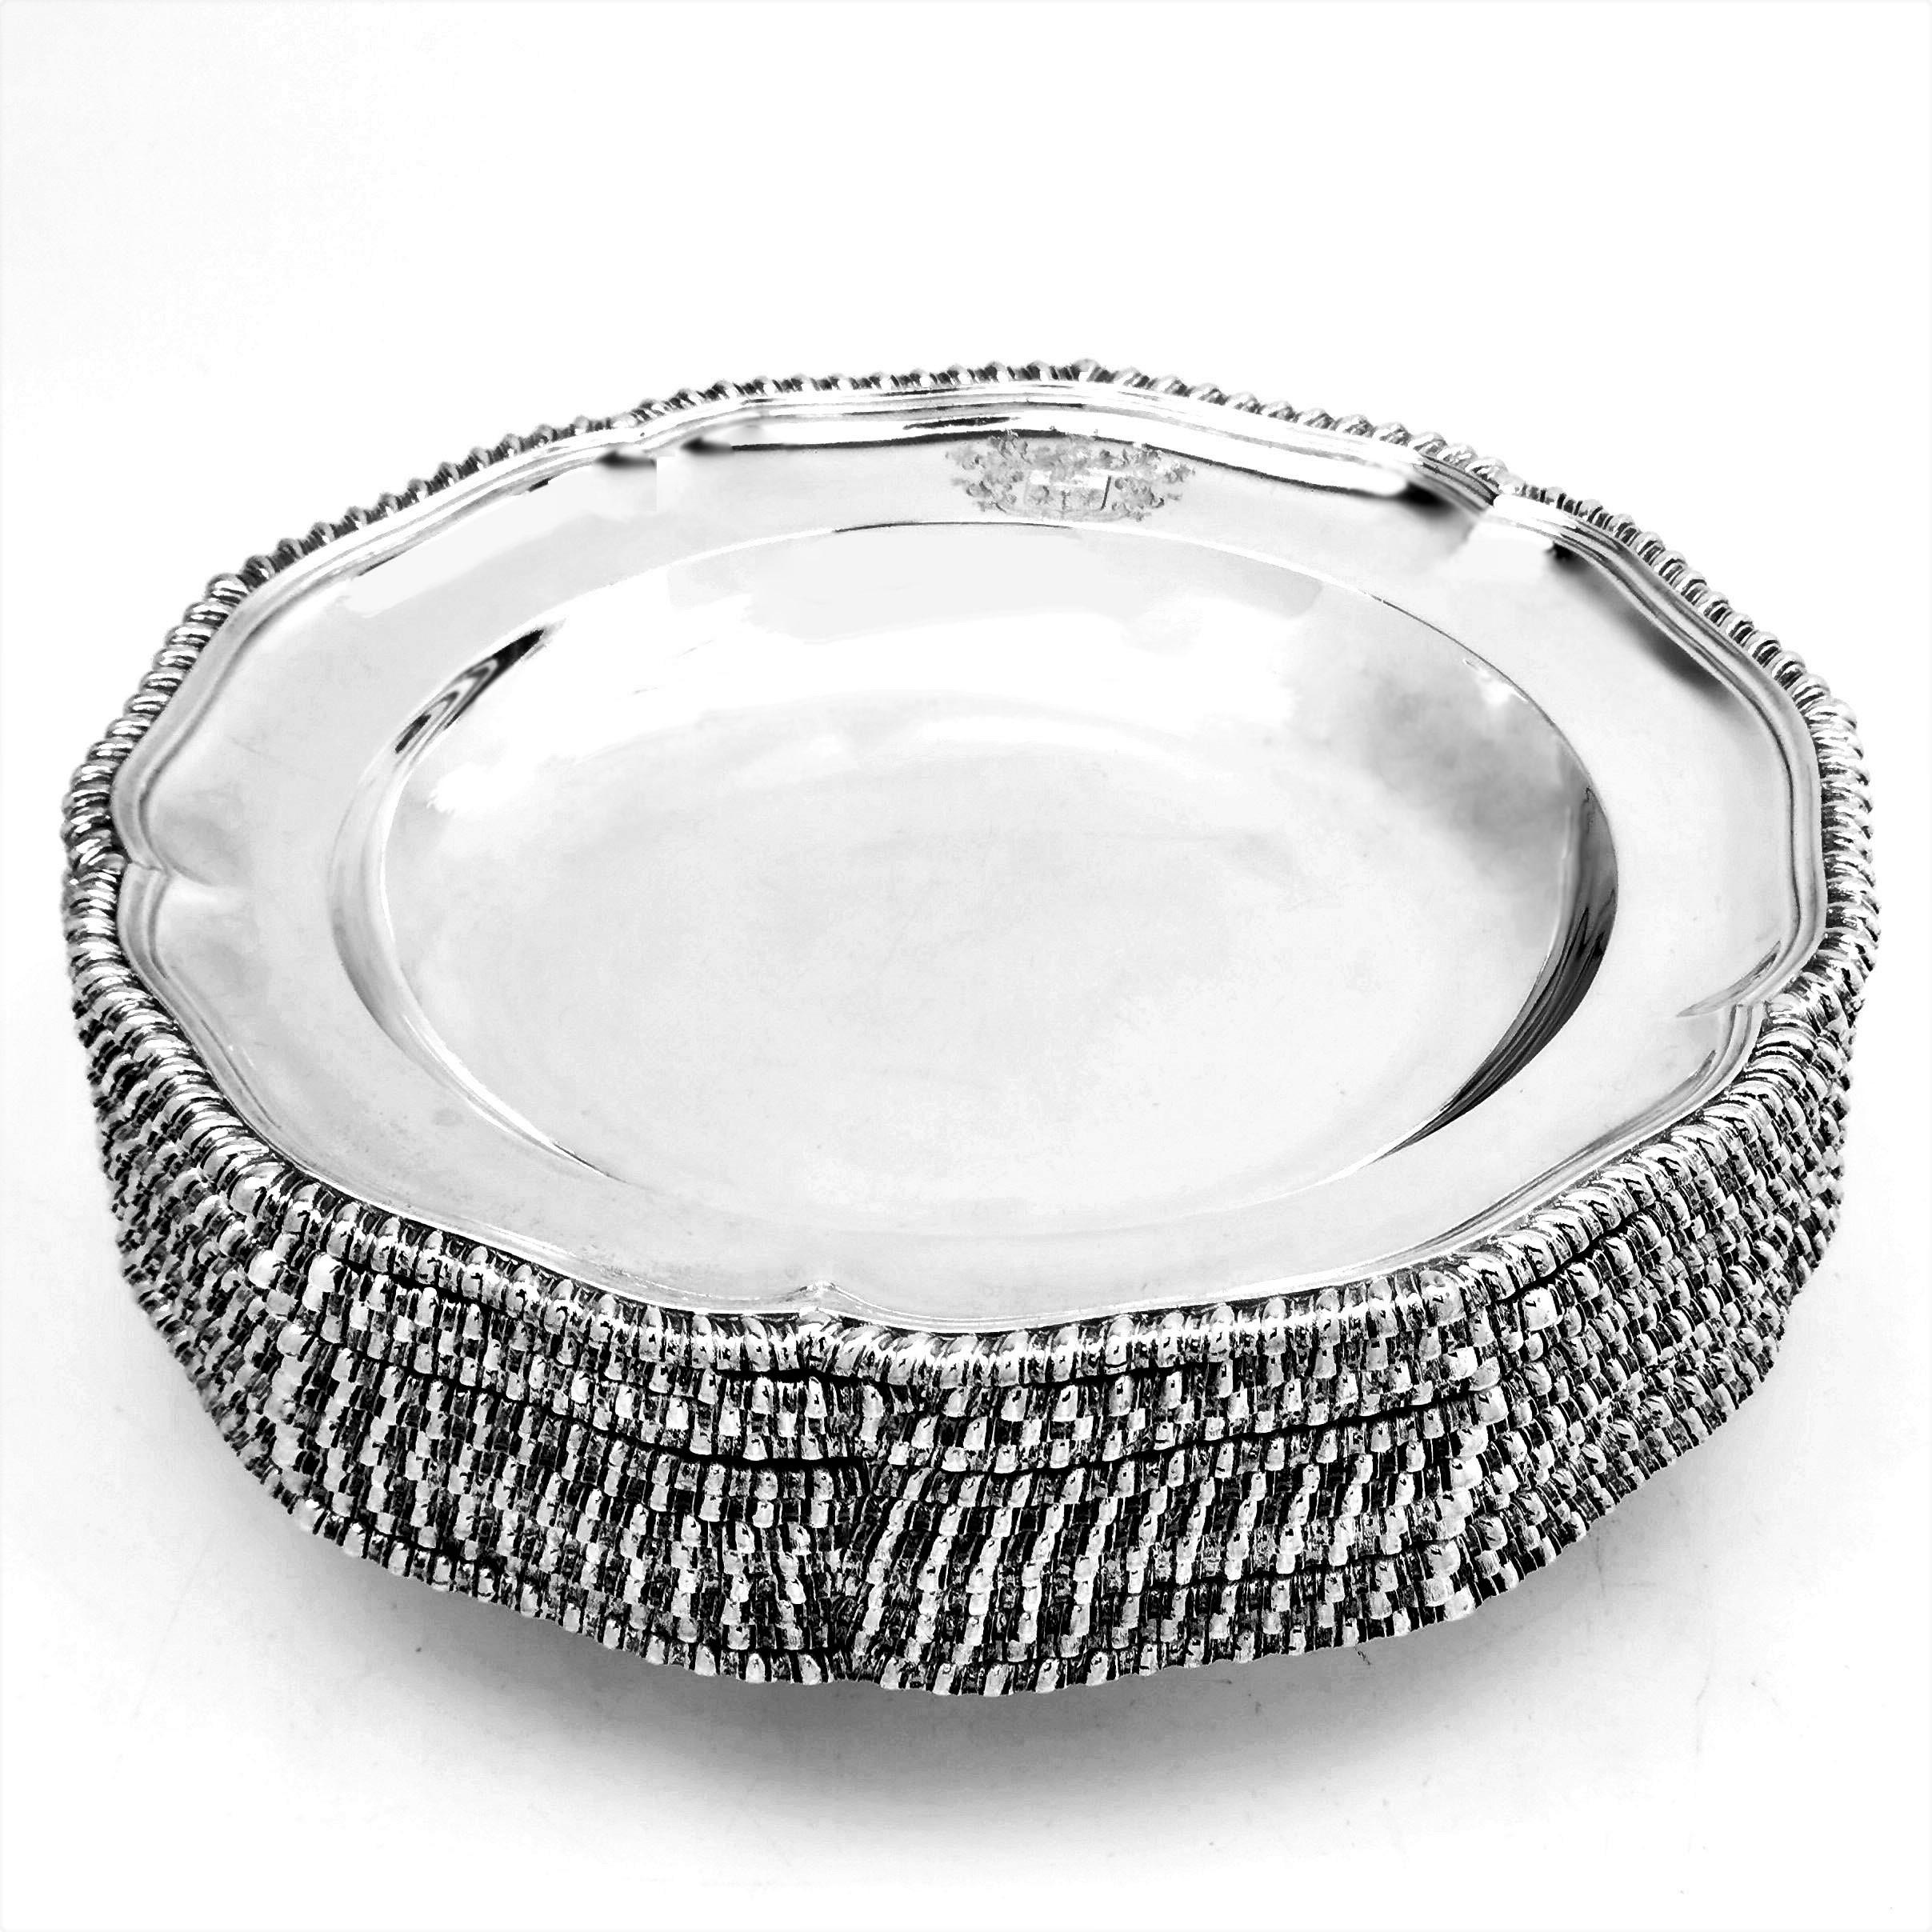 English Set 12 Antique Victorian Sterling Silver Soup Plates 1874 Gadroon